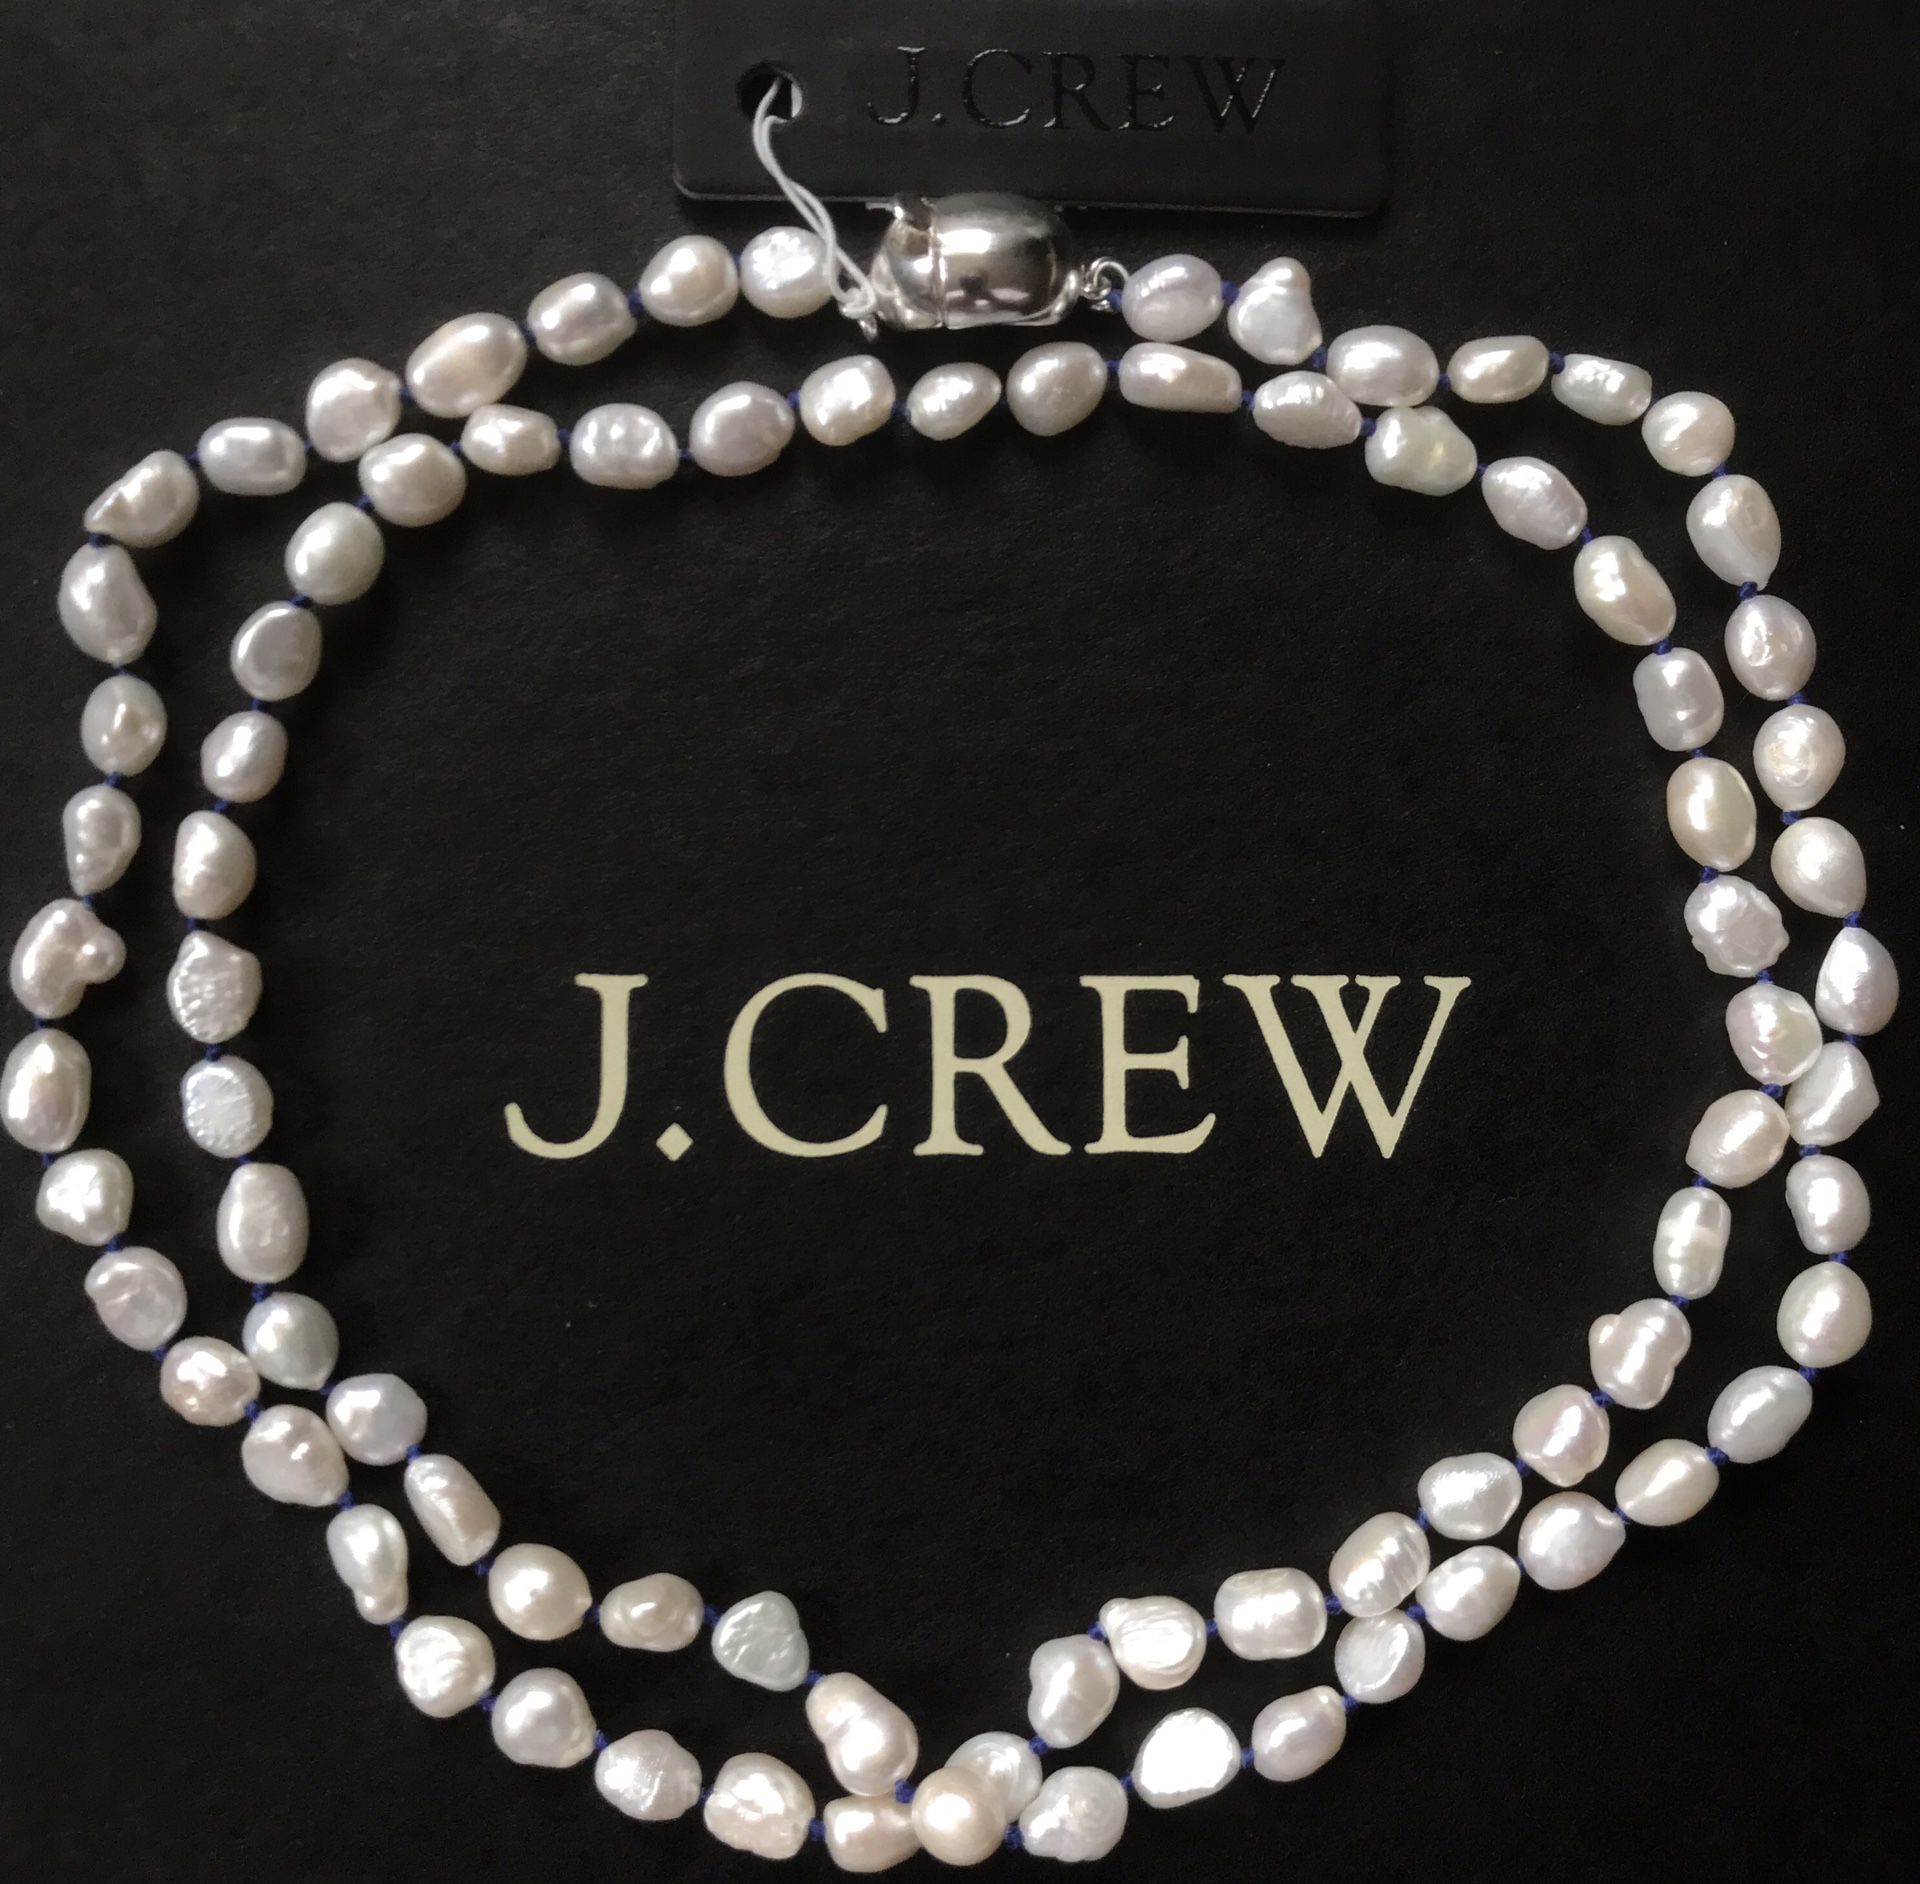 (NEW) (1 AVAILABLE) WOMEN’S J.CREW LONG FRESHWATER PEARL AND GOLD NECKLACE - SIZE: OS (ONE SIZE) (MSRP: $118)